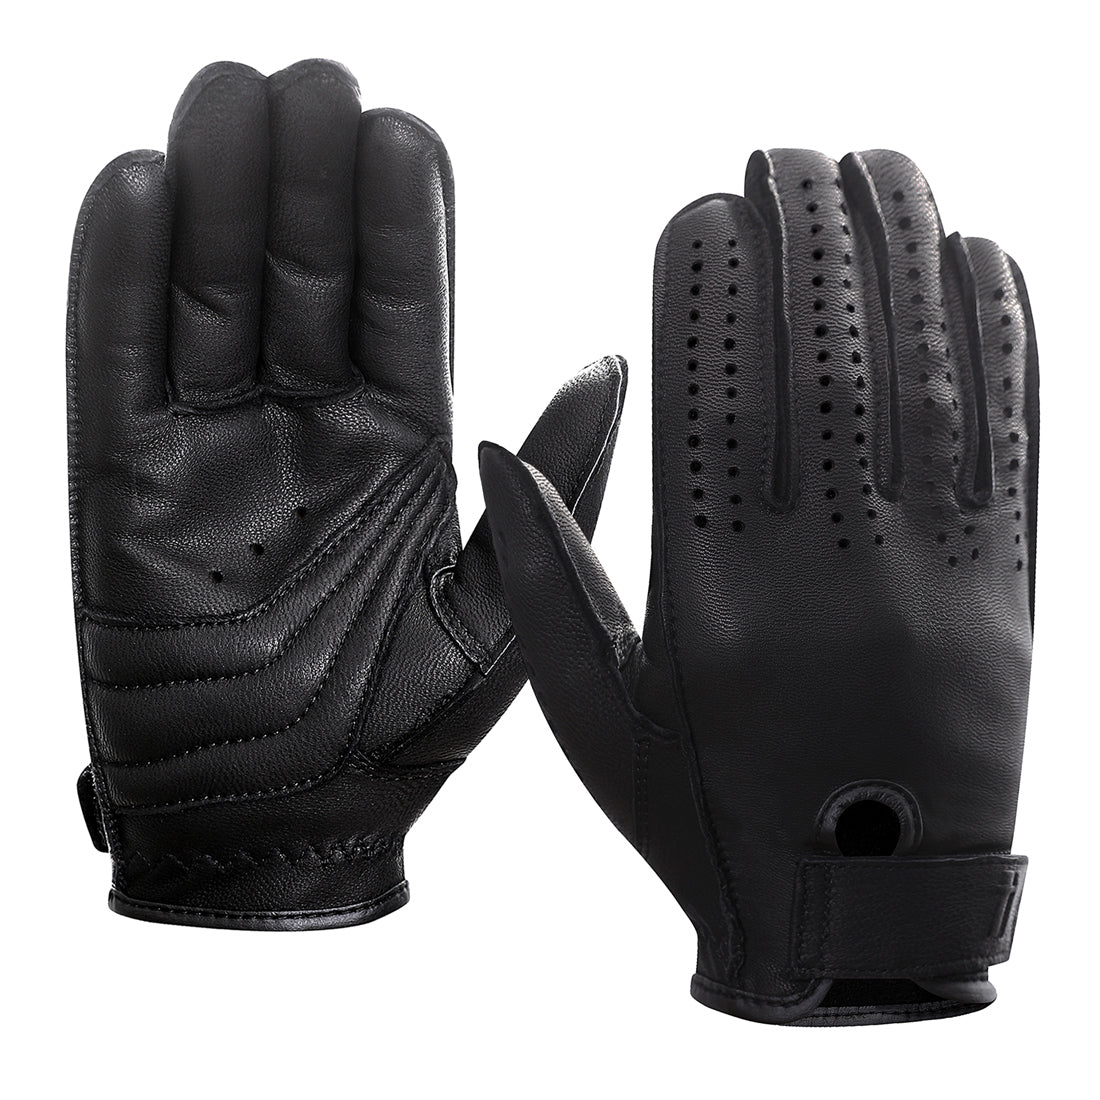 Harssidanzar Motorcycle Gloves for Men, Breathable Leather Driving